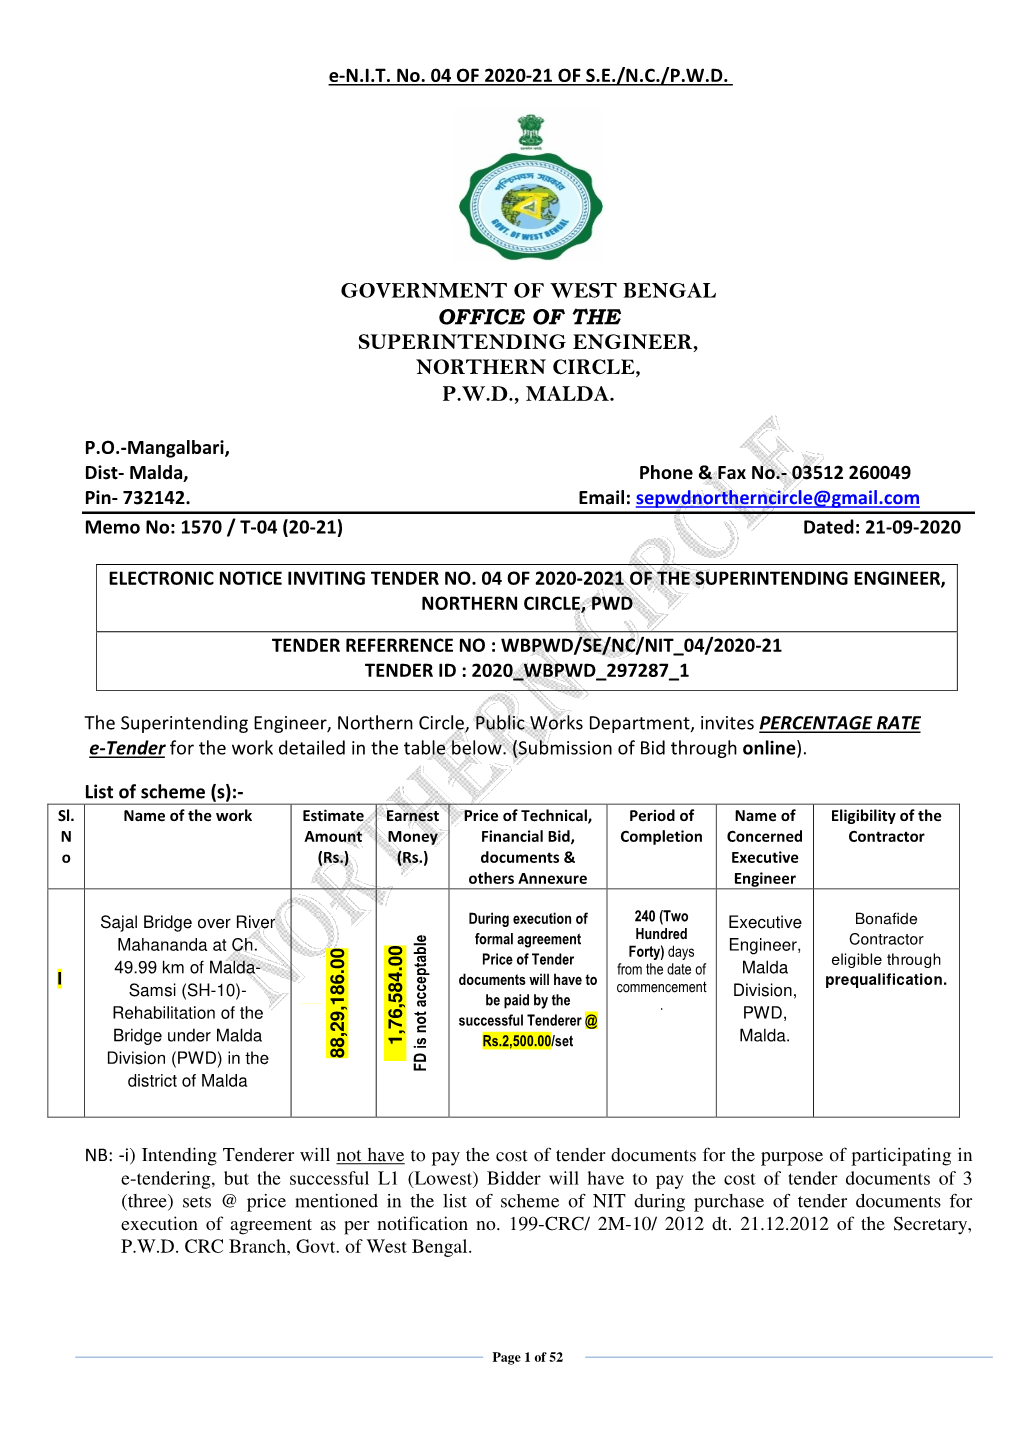 Government of West Bengal Office of the Superintending Engineer, Northern Circle, P.W.D., Malda